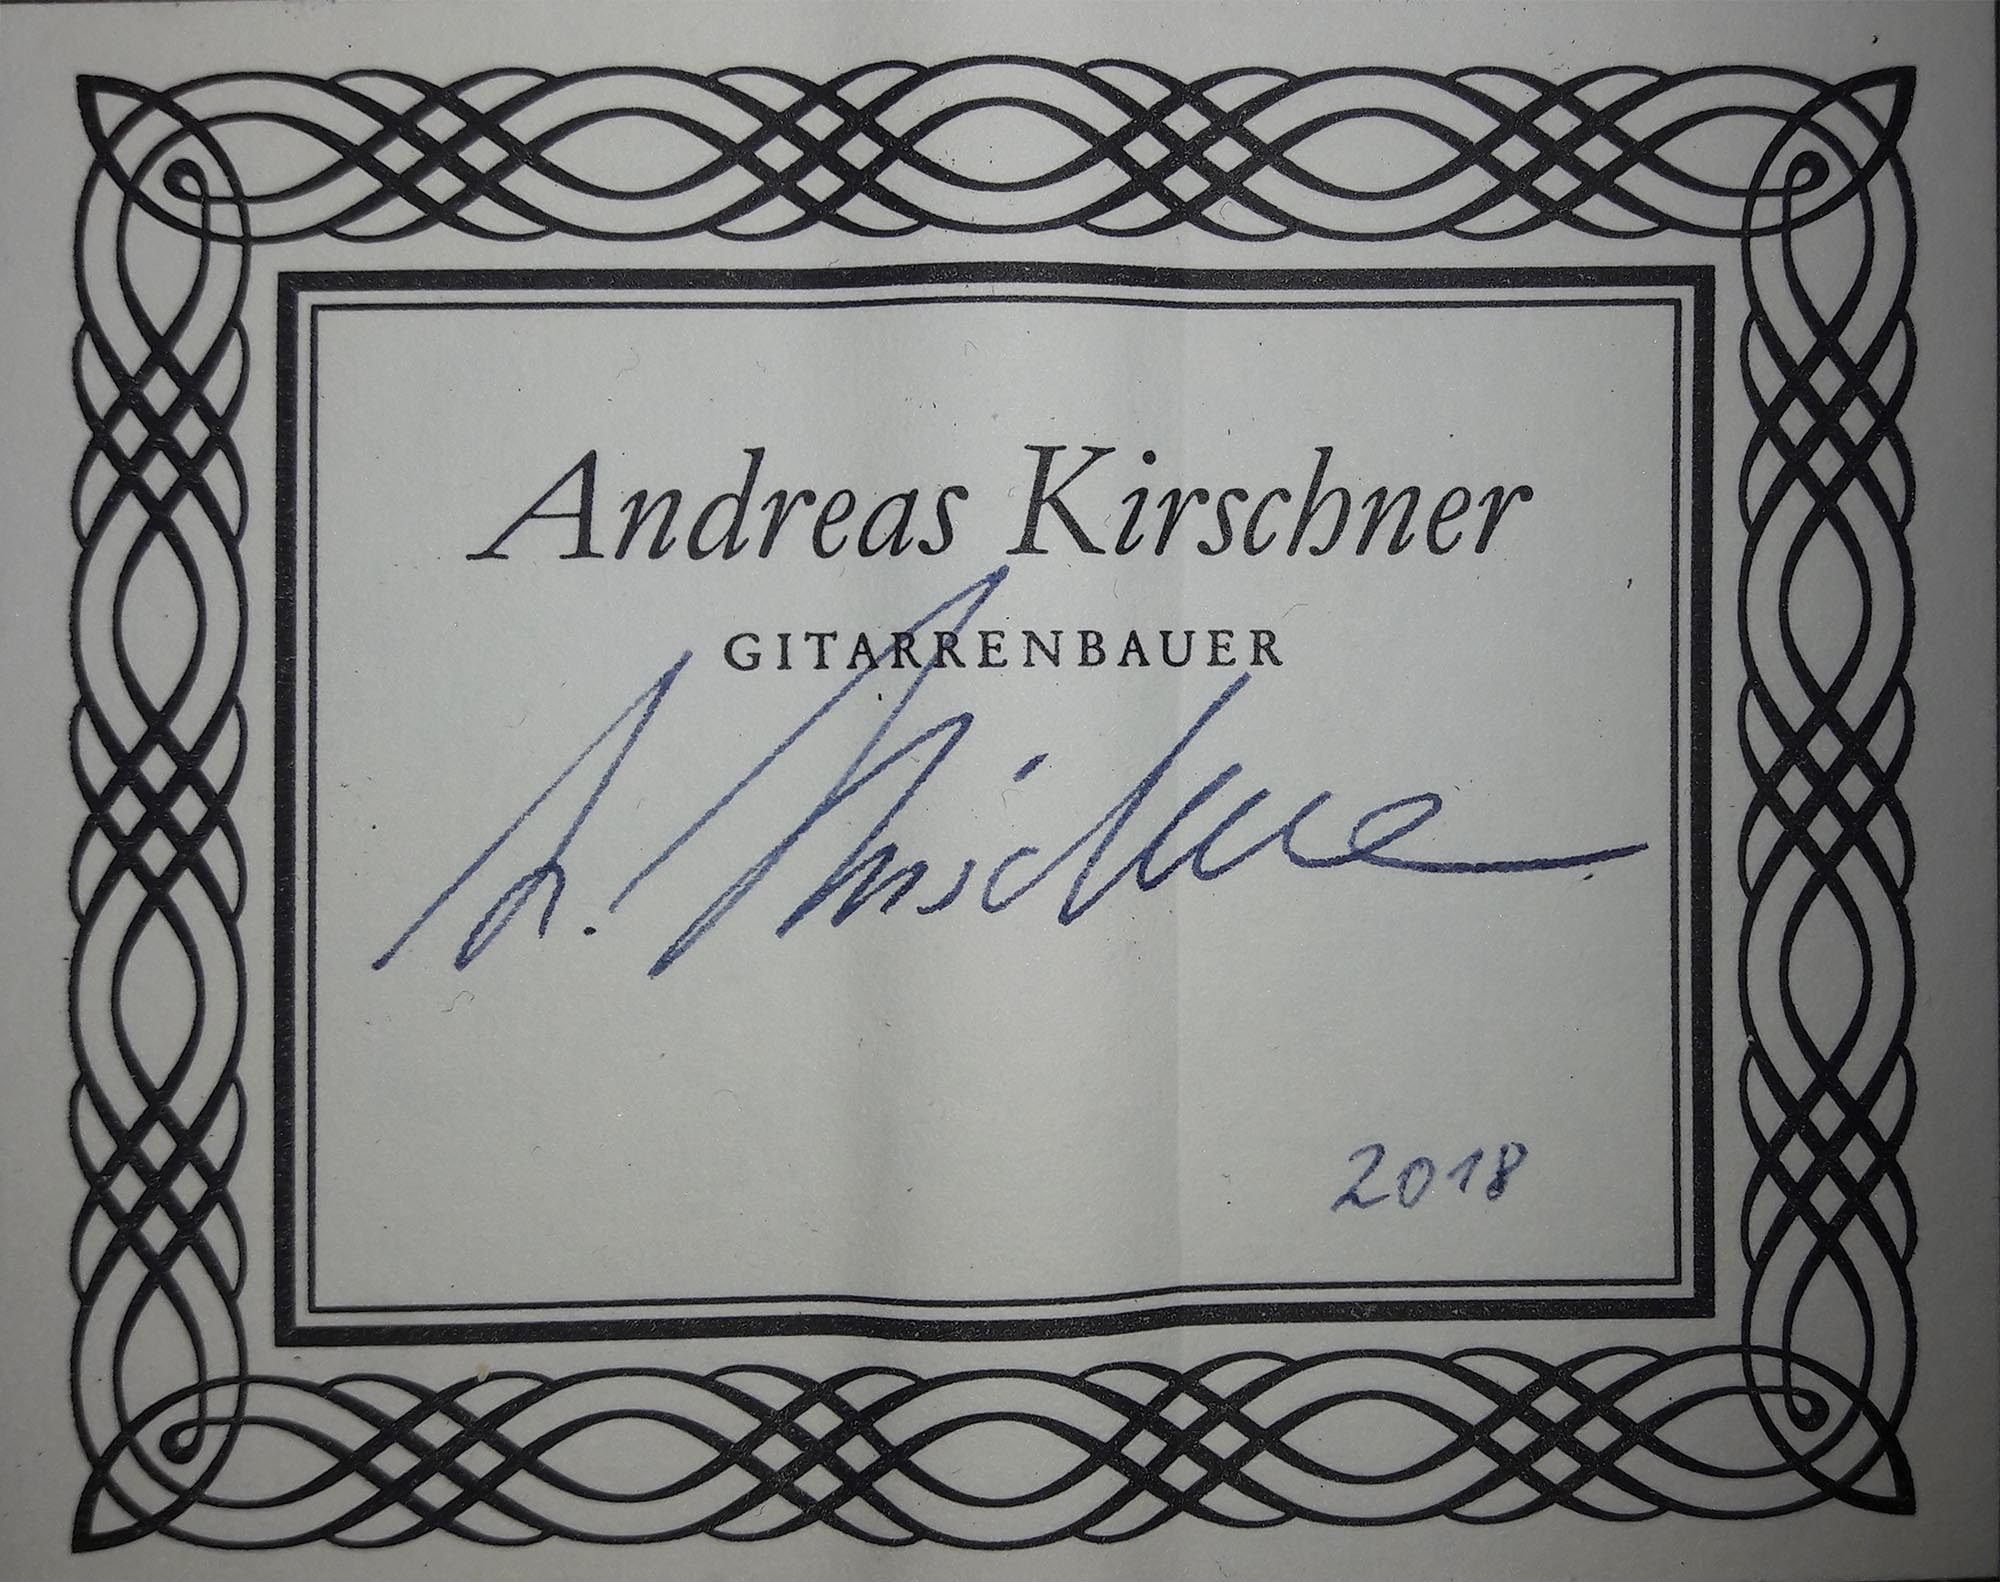 a kirschner andreas 2018 12122018 label